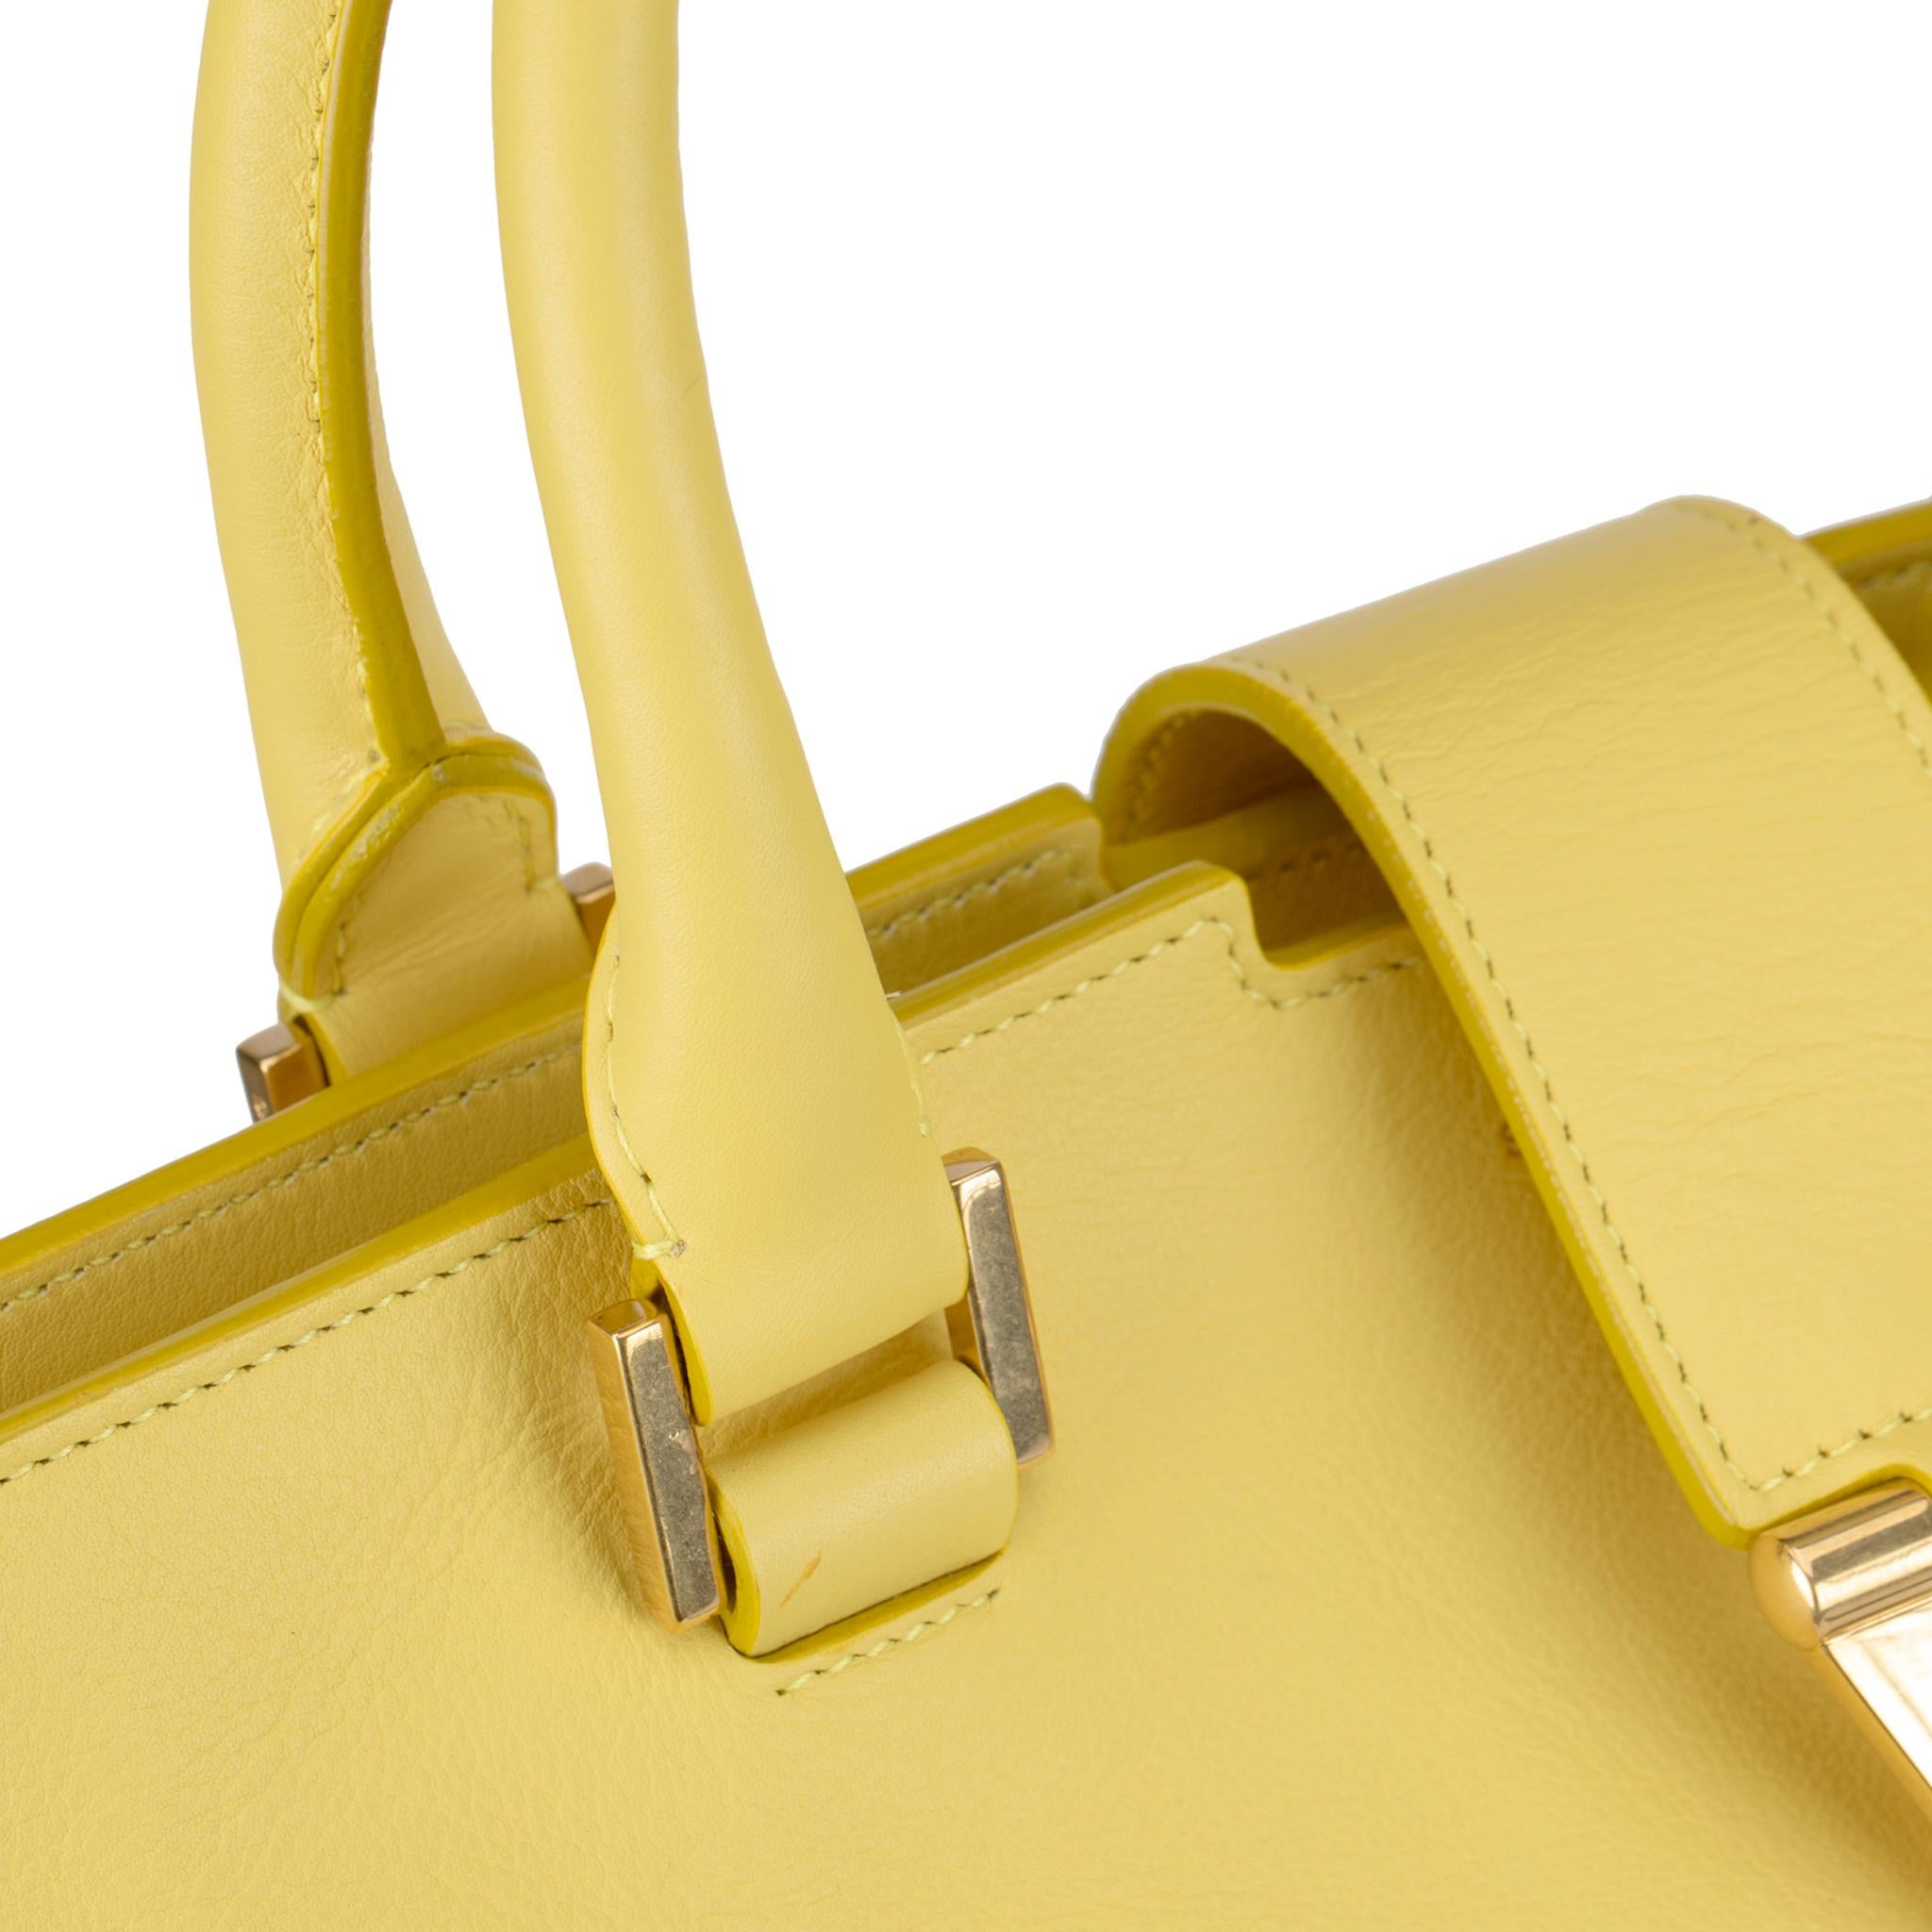 Yves Saint Laurent Cabas Chyc Tote Yellow Aged Gold Hardware In Excellent Condition For Sale In DOUBLE BAY, NSW